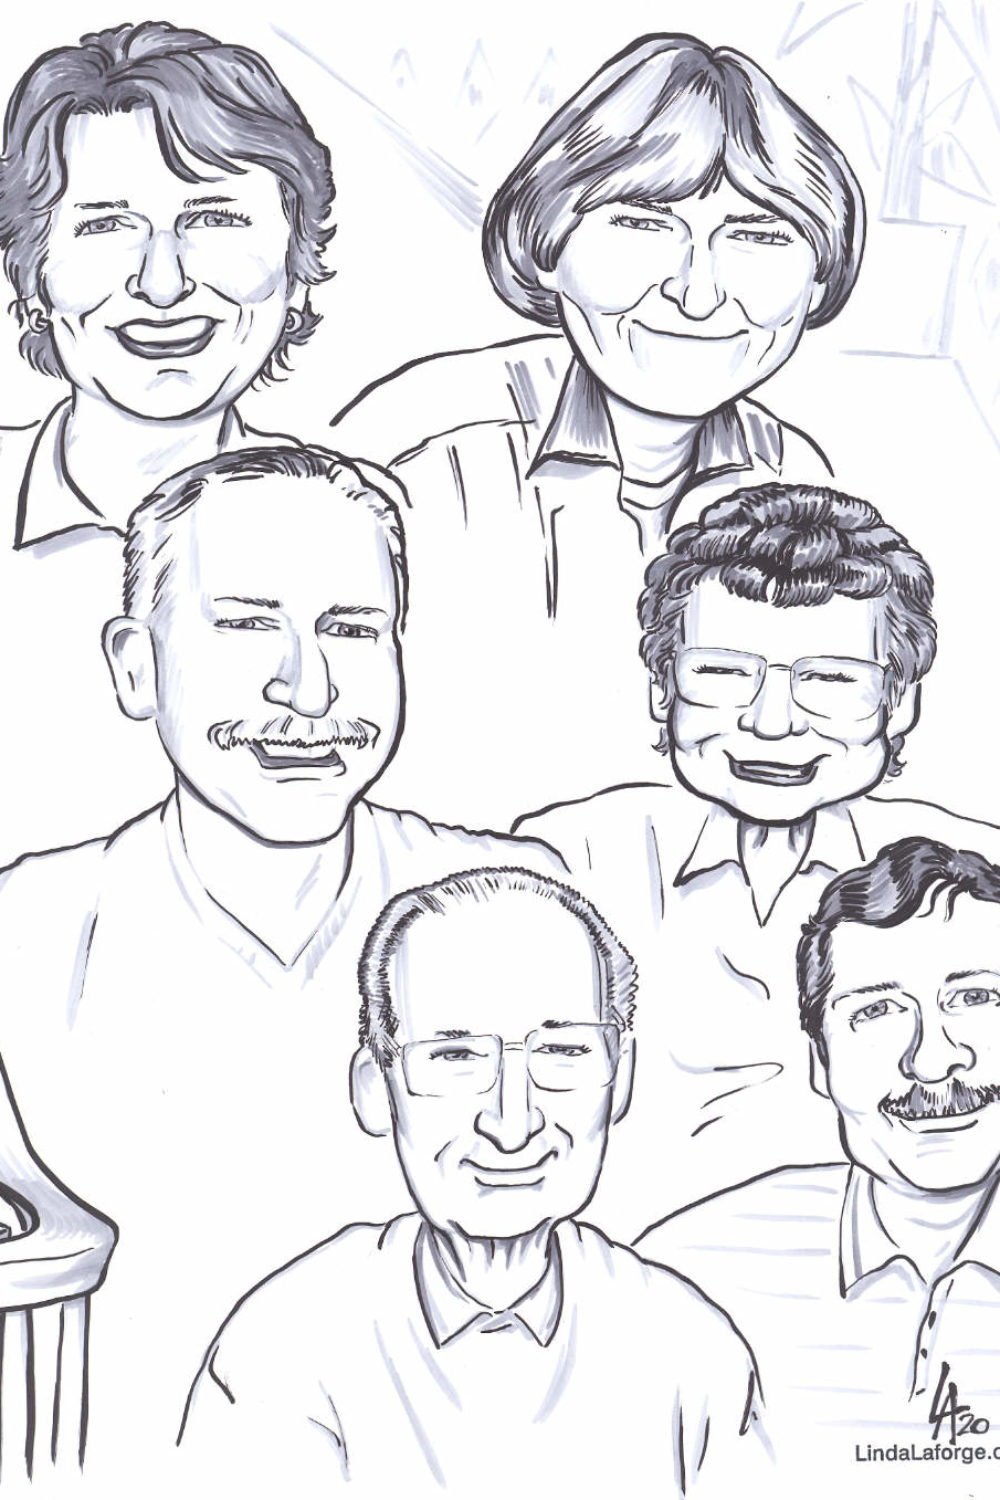 Joanie_family_caricture